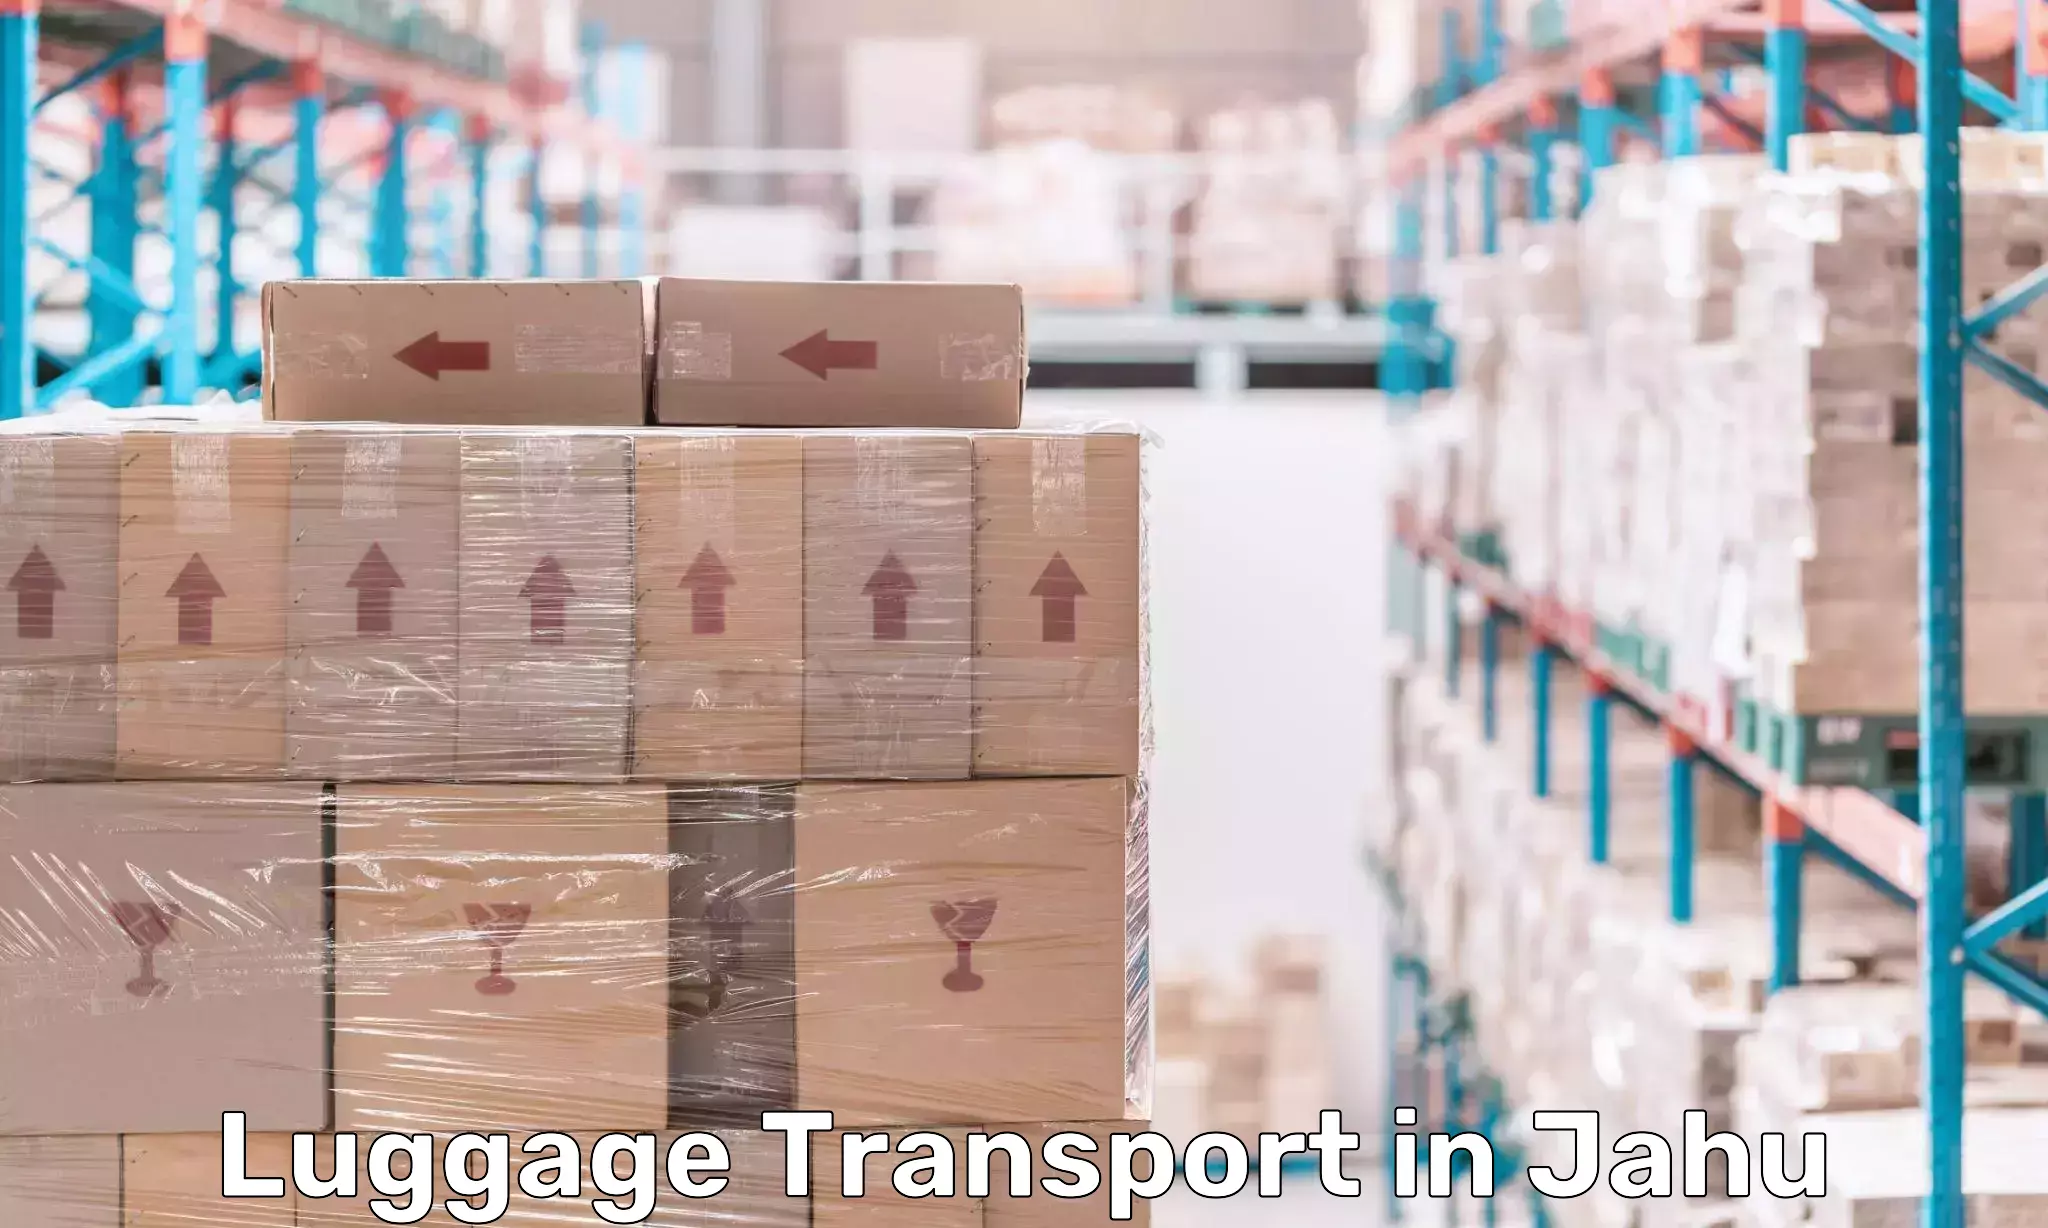 Luggage transport deals in Jahu